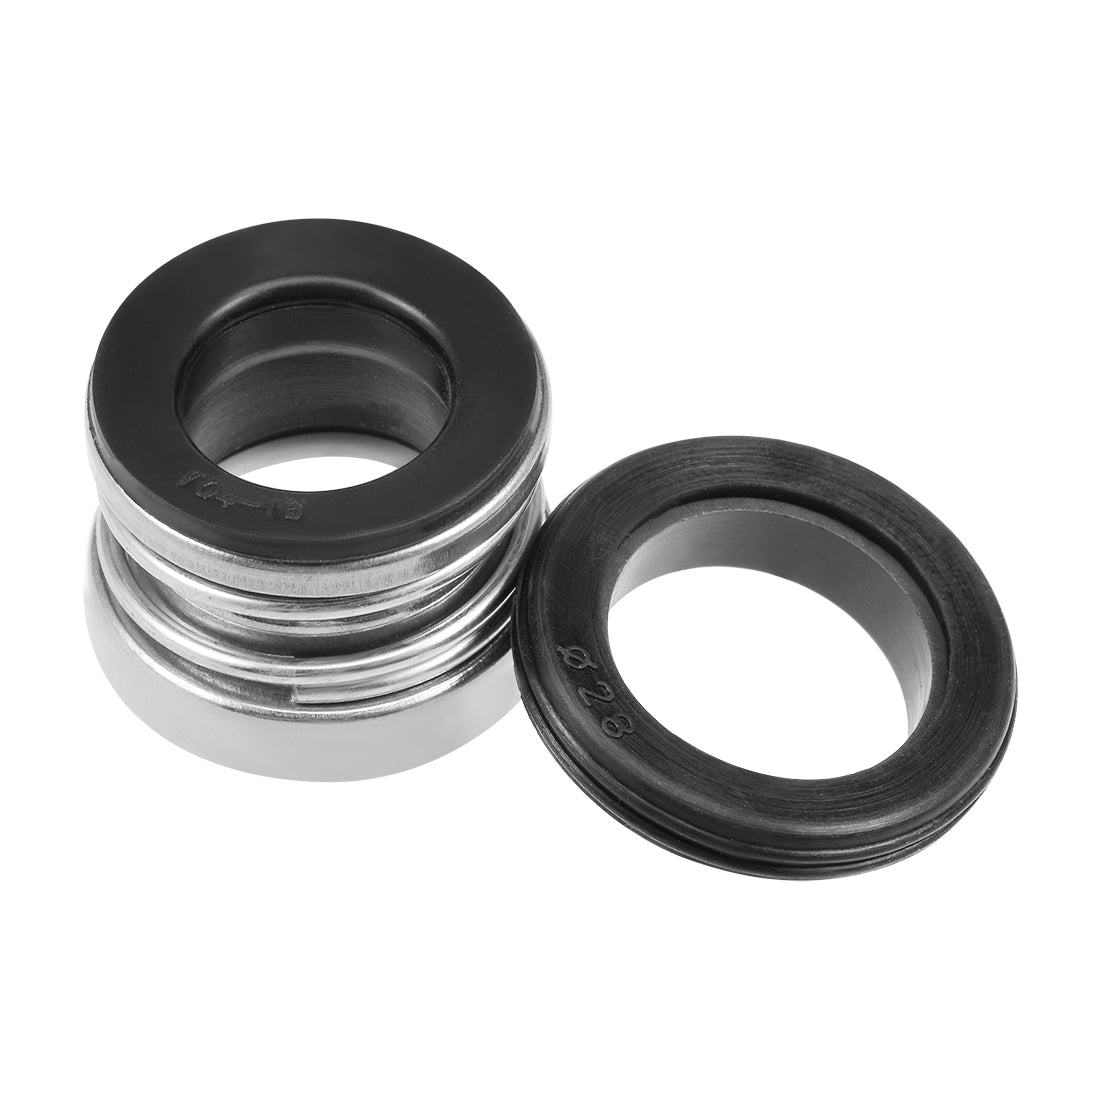 uxcell Uxcell Mechanical Shaft Seal Replacement for Pool Spa Pump 104-16, Pack of 2